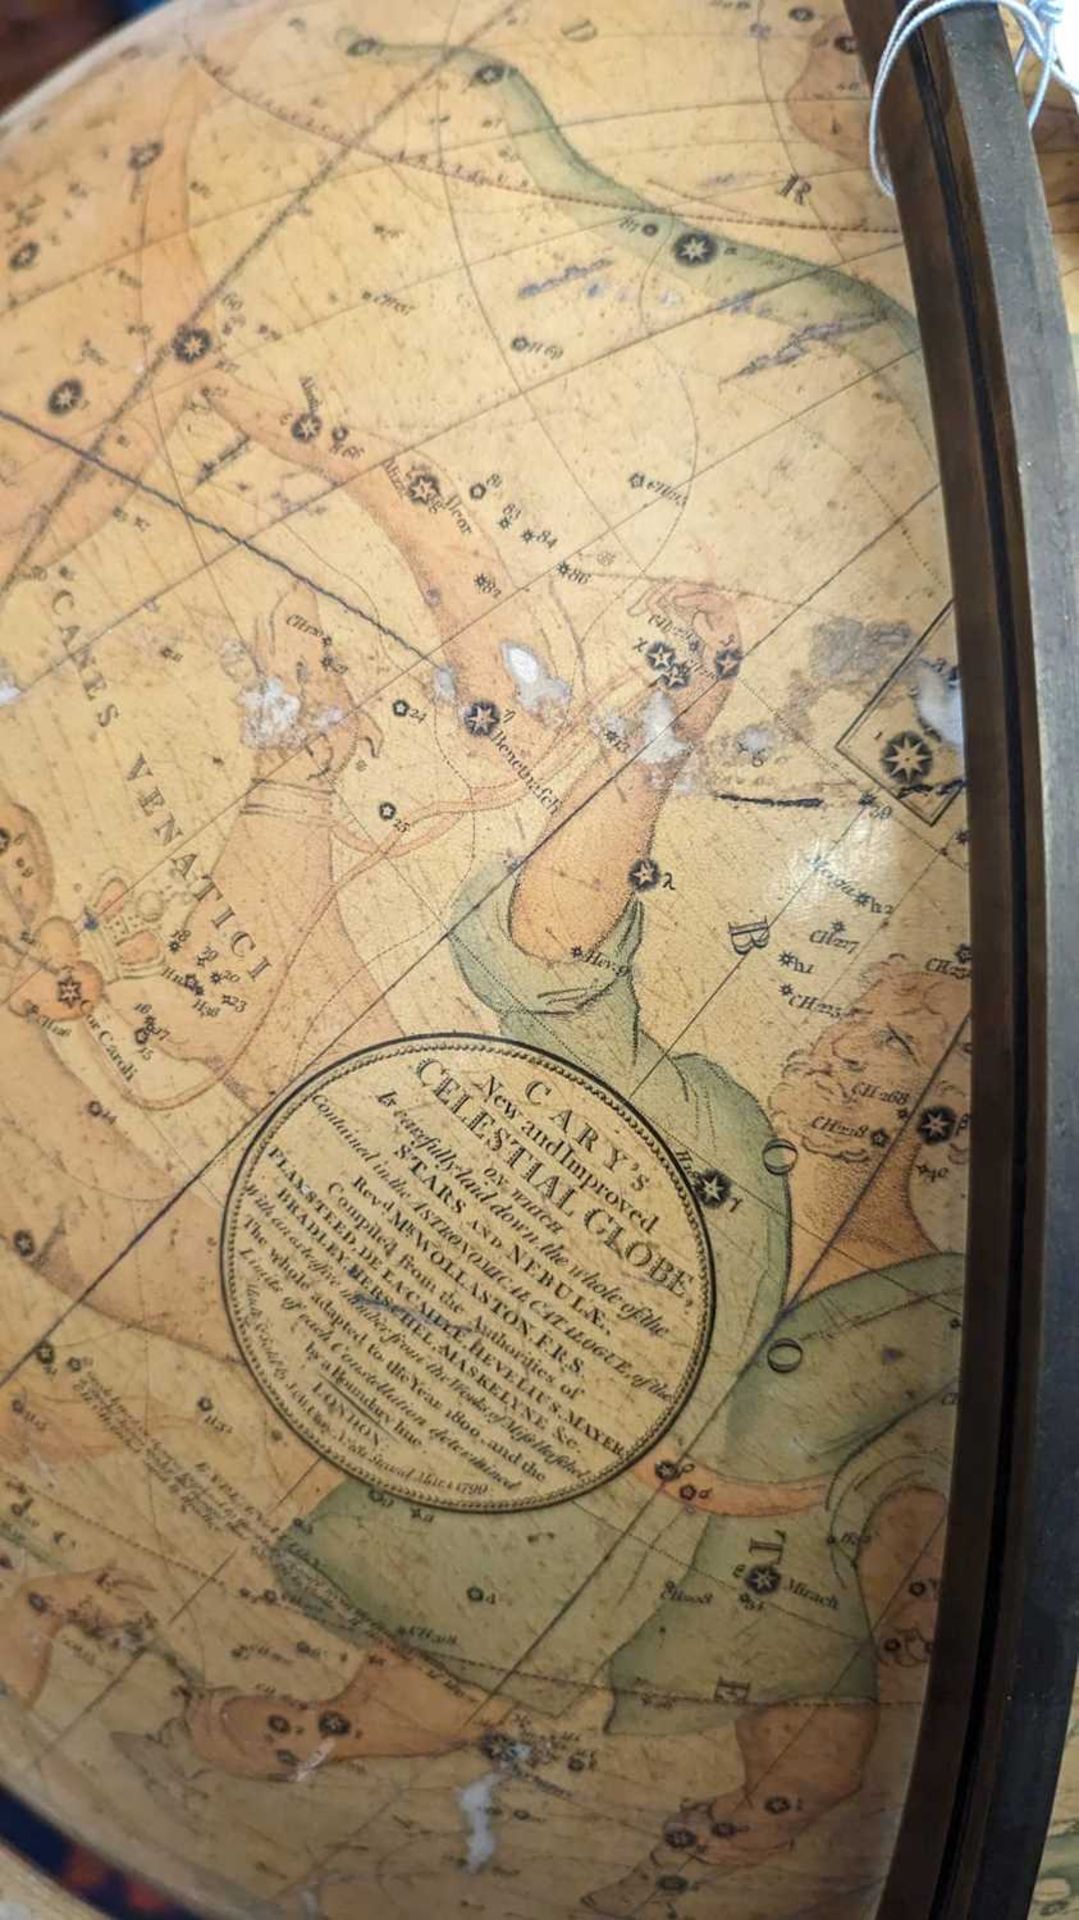 A large celestial library globe by J & W Cary, - Image 55 of 84